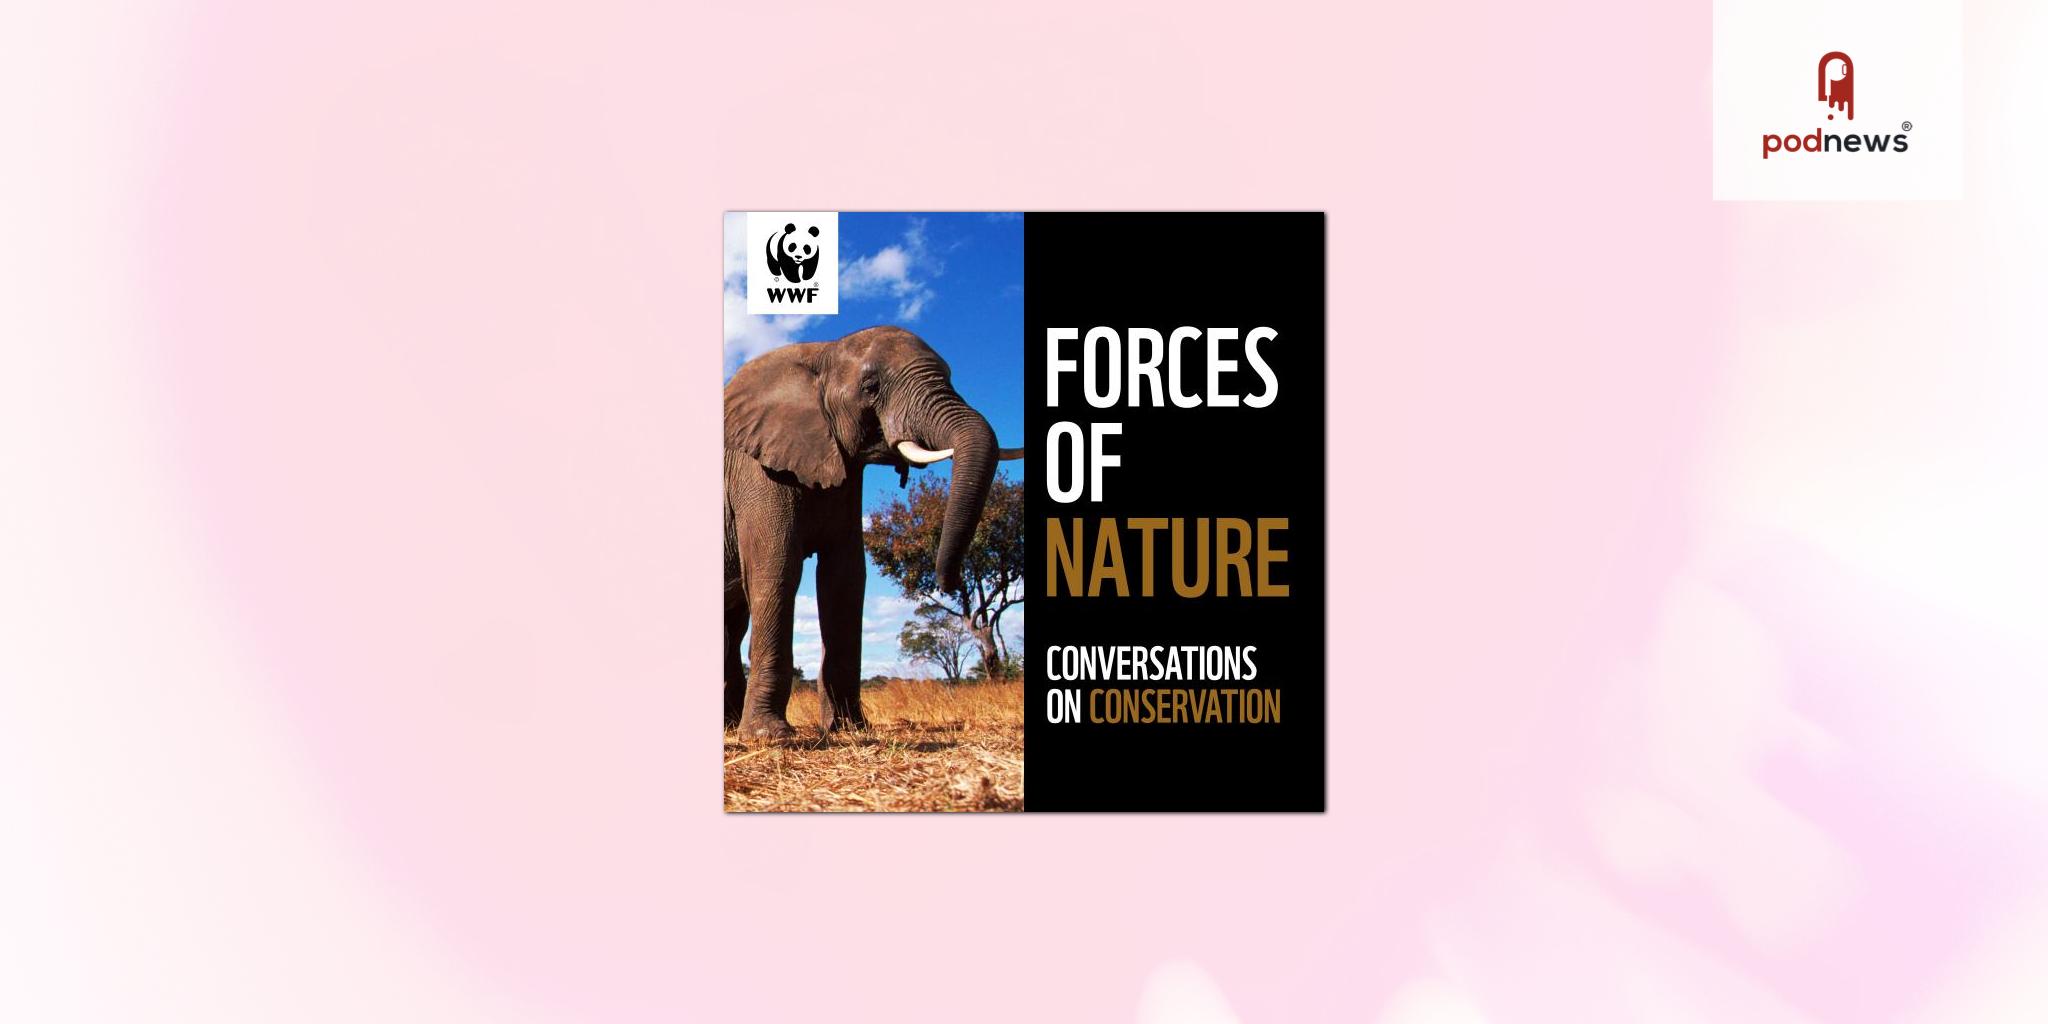 WWF launches podcast mini-series to mark 60 years of conservation impact